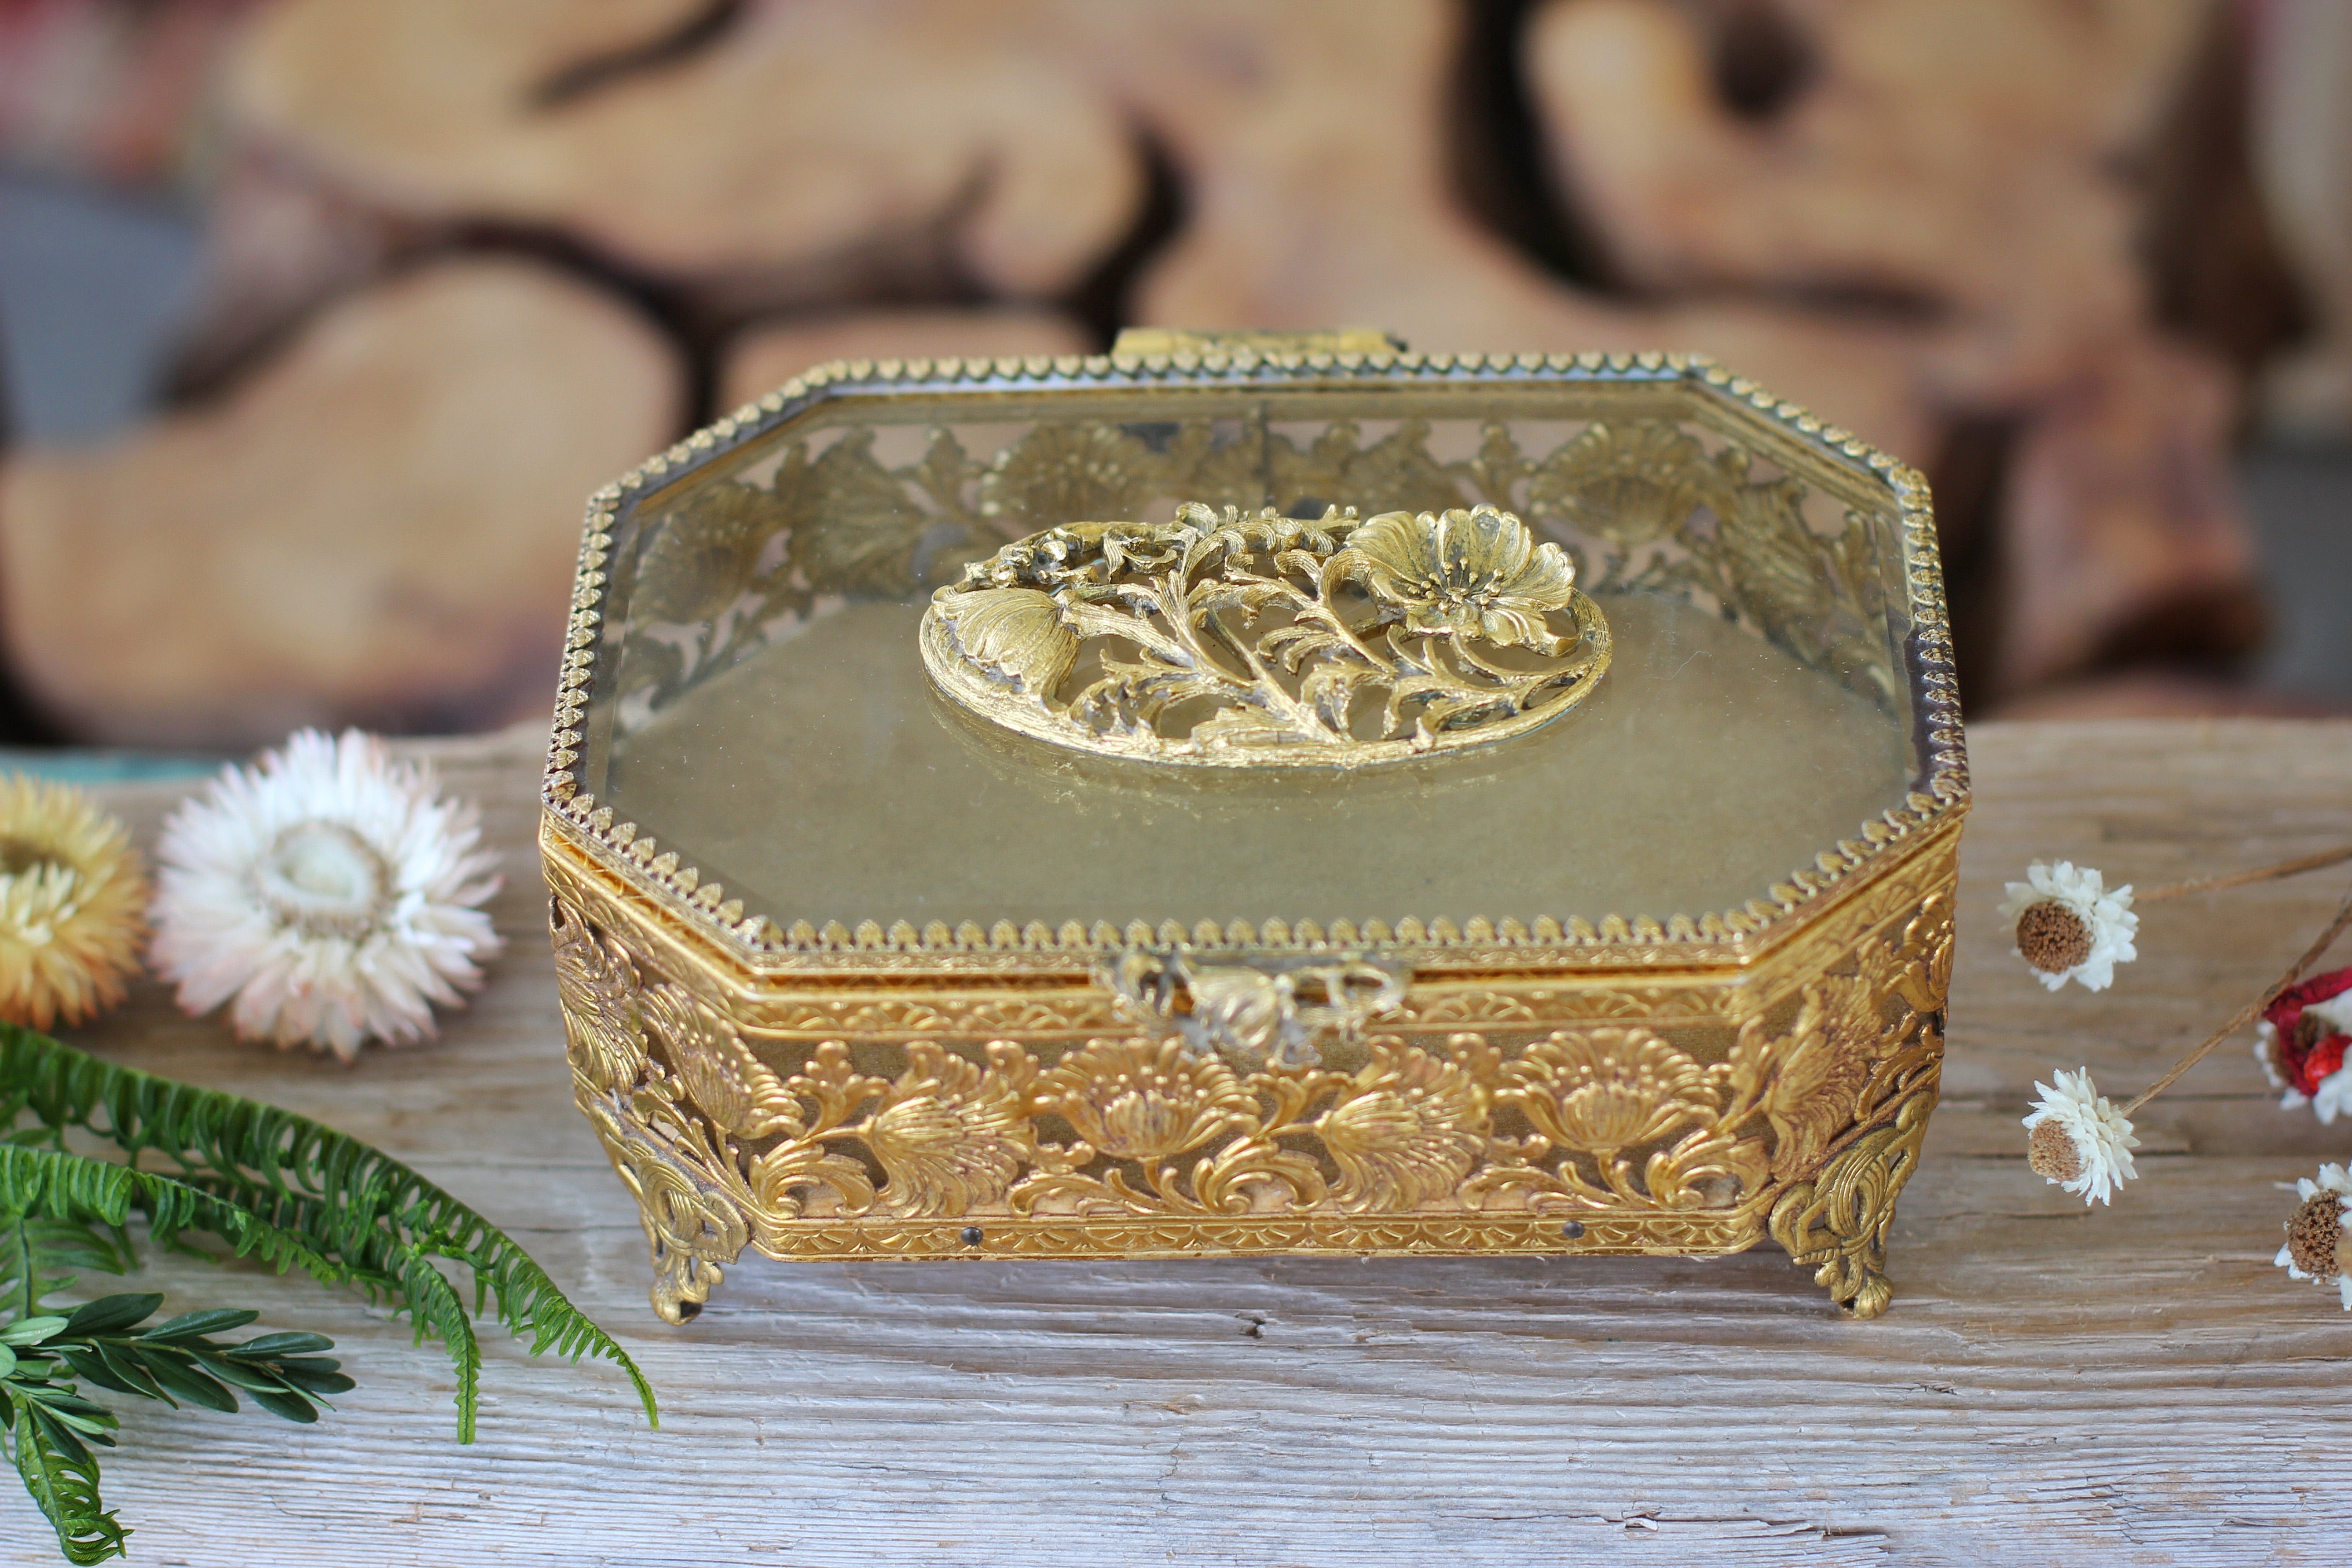 Antique Floral Dogwood Jewelry Box